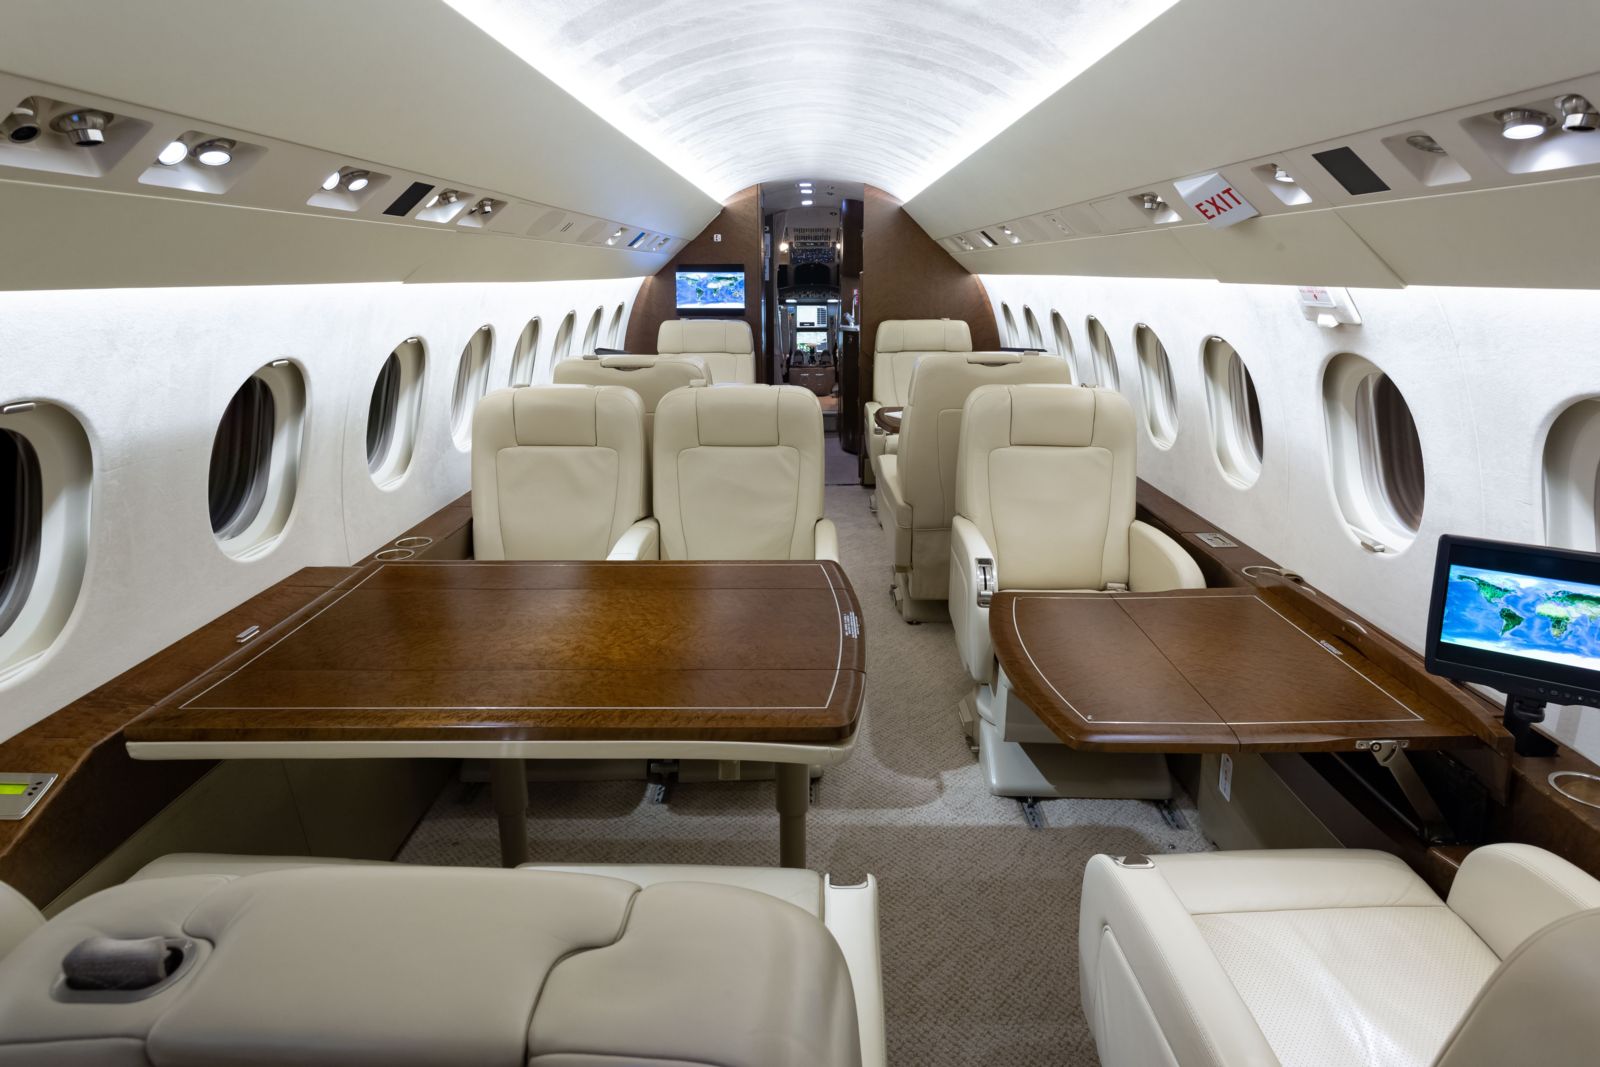 Dassault Falcon 2000LX  S/N 186 for sale | gallery image: /userfiles/files/specs/F2000LX/int%20face%20fwd.jpeg